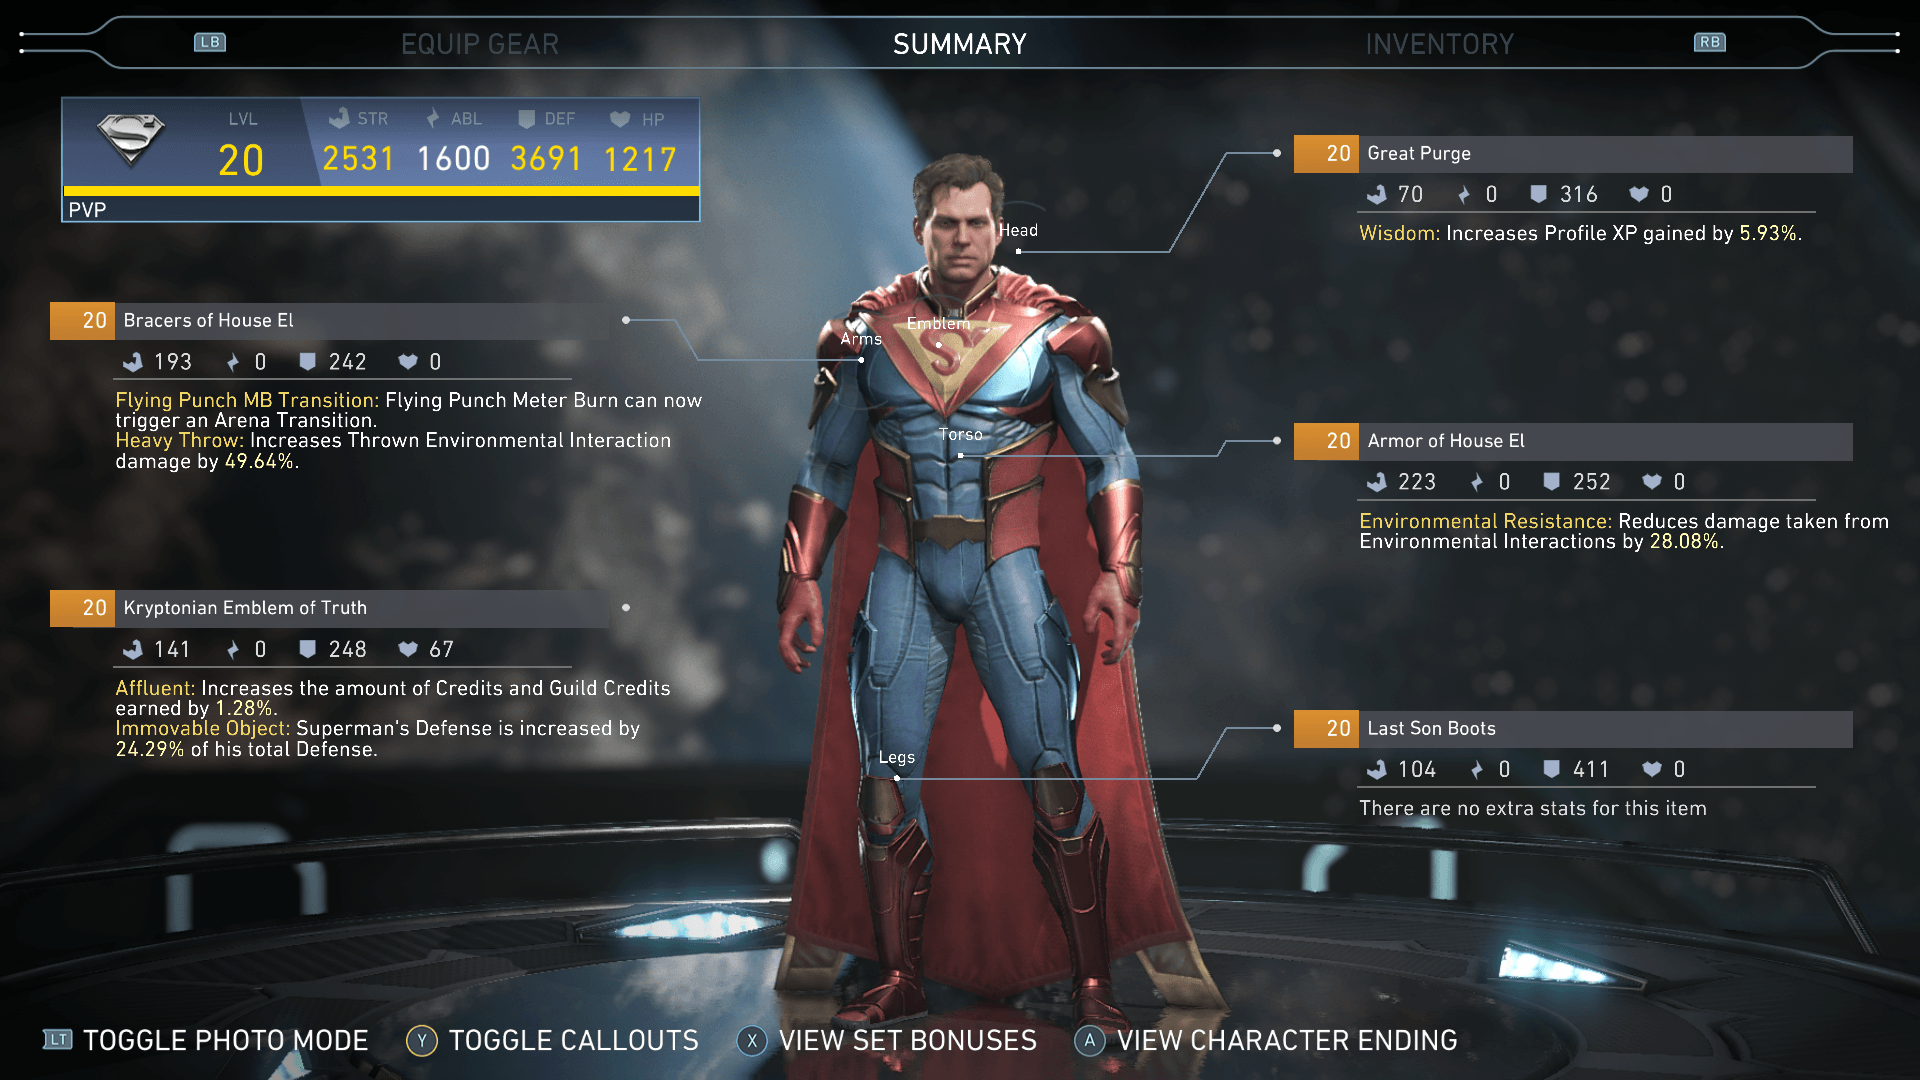 Kryptonian Emblem of Truth (up to +25% boost to DEF.) The single